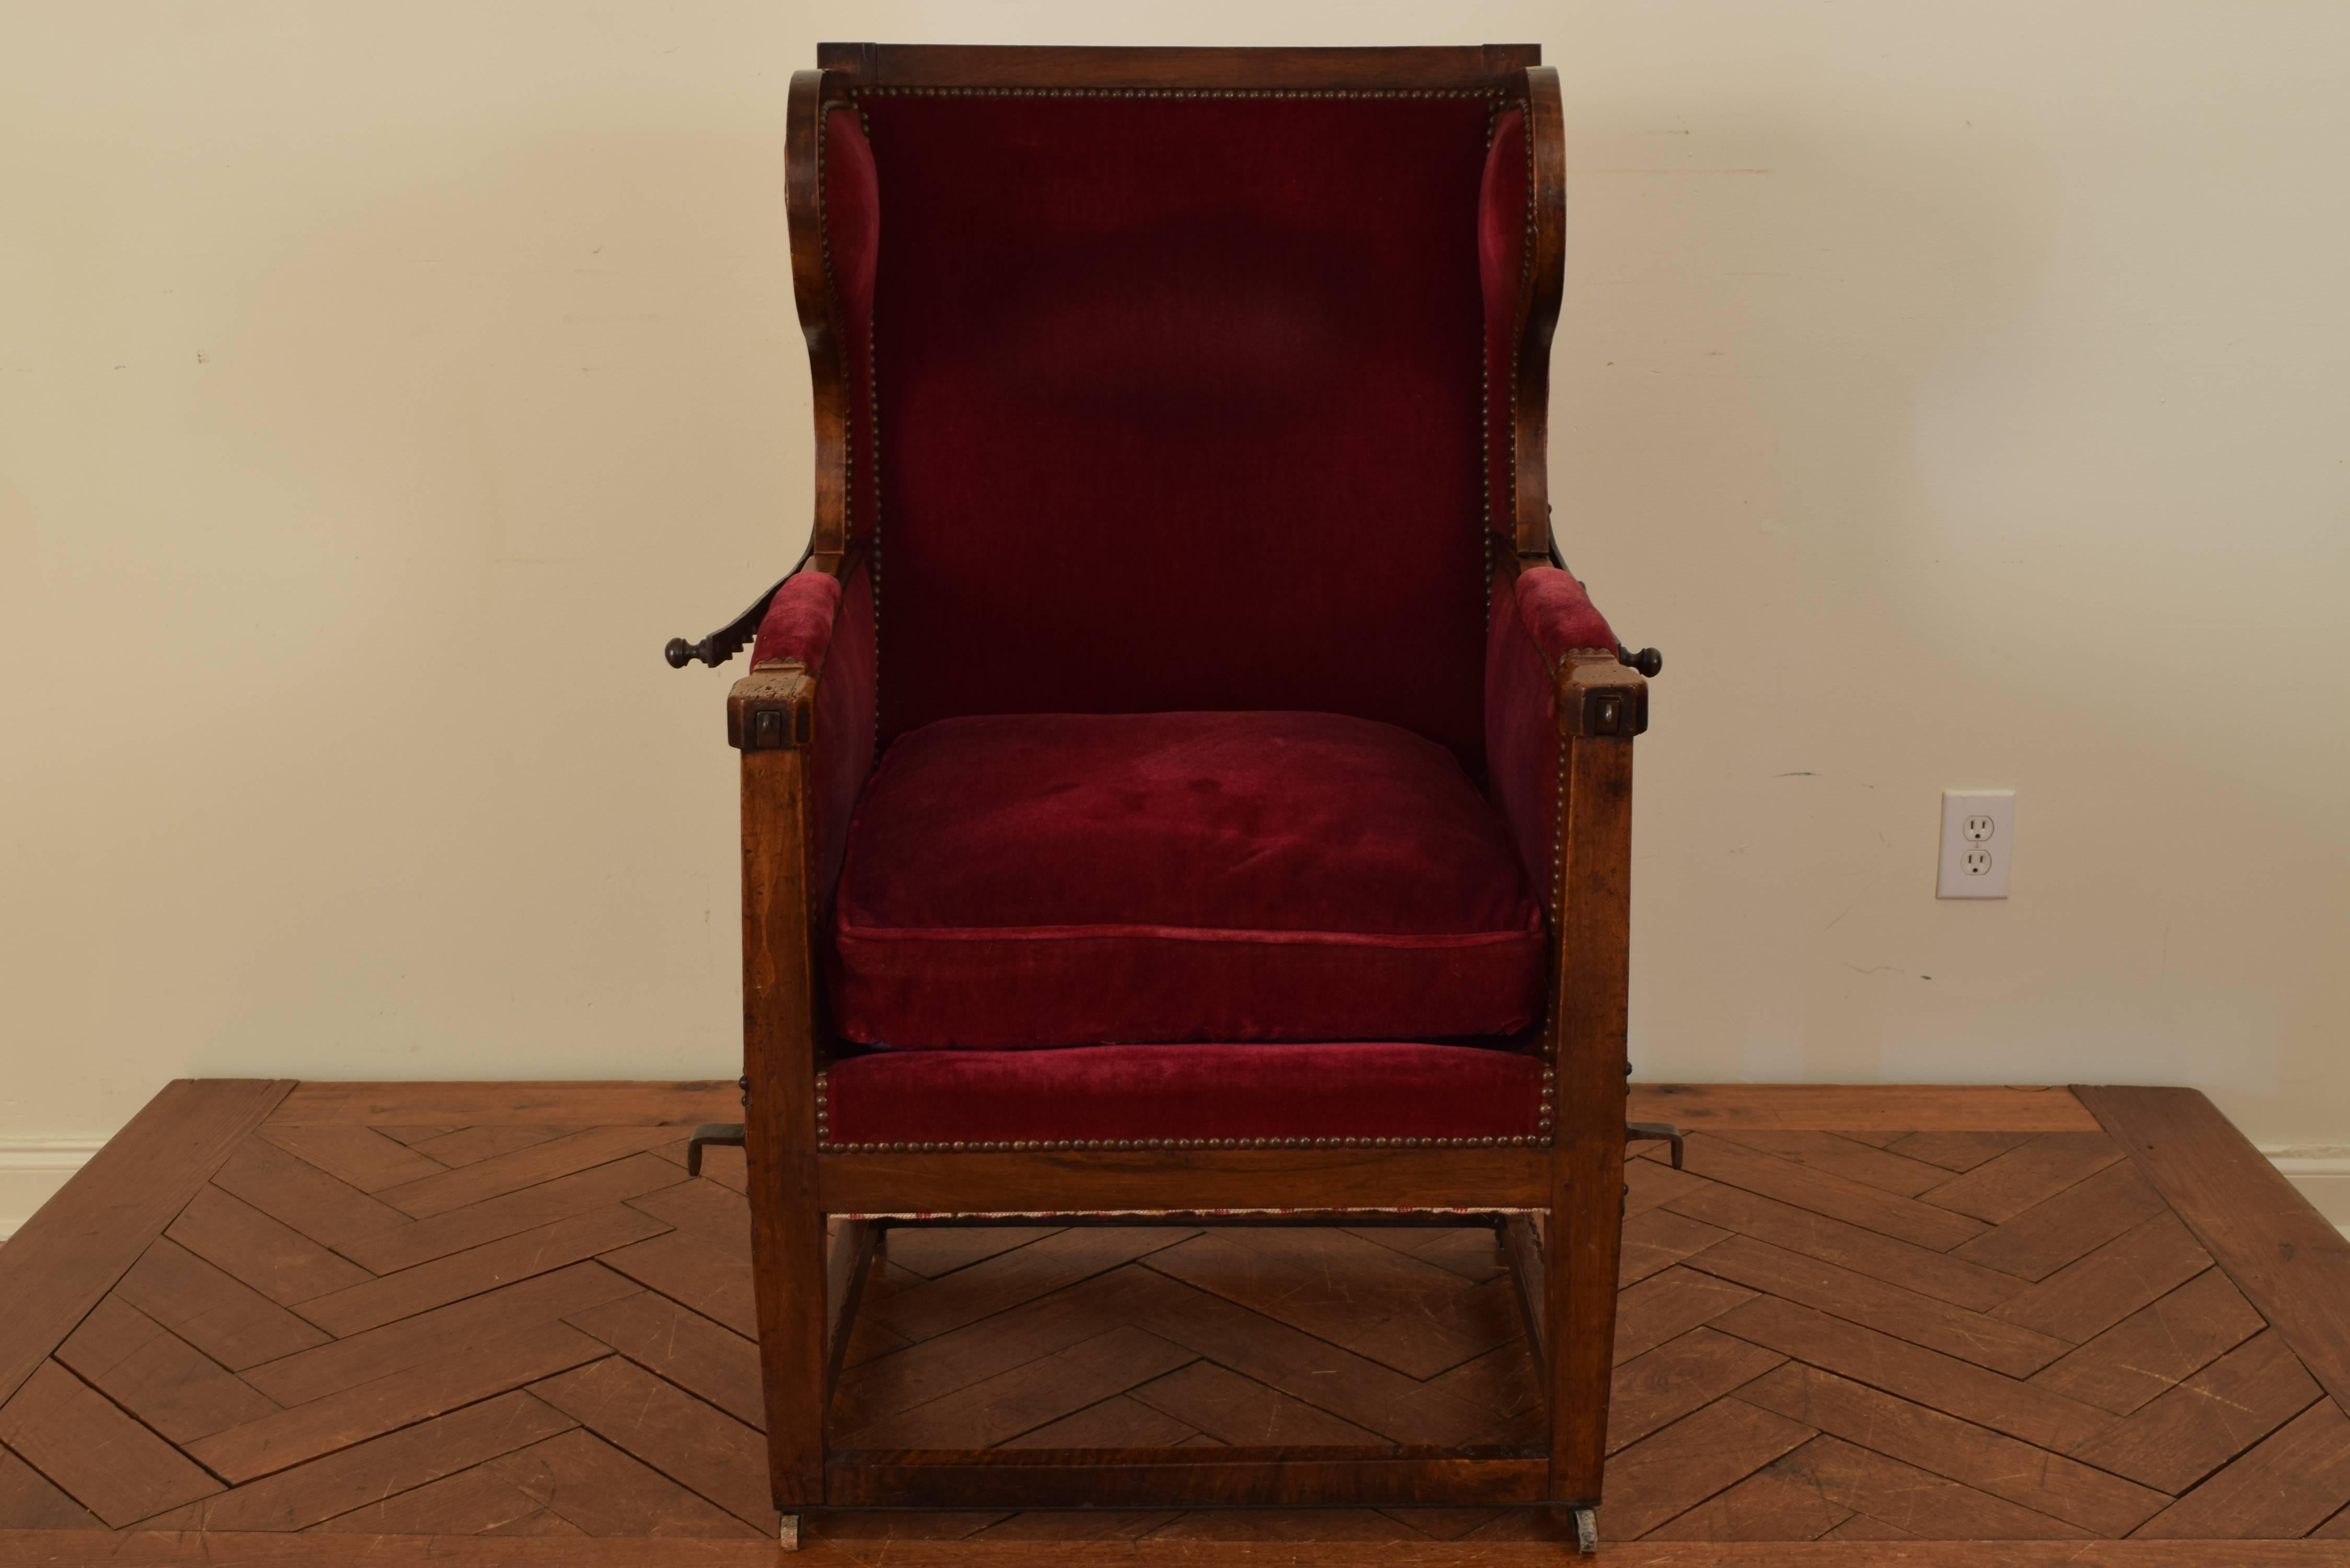 The straight back with shaped wings and hinged to recline, attached to the lower chair with adjustable steel supports, having a down filled seat and raised on slightly tapering legs joined by a box stretcher, raised on small wheeled casters.